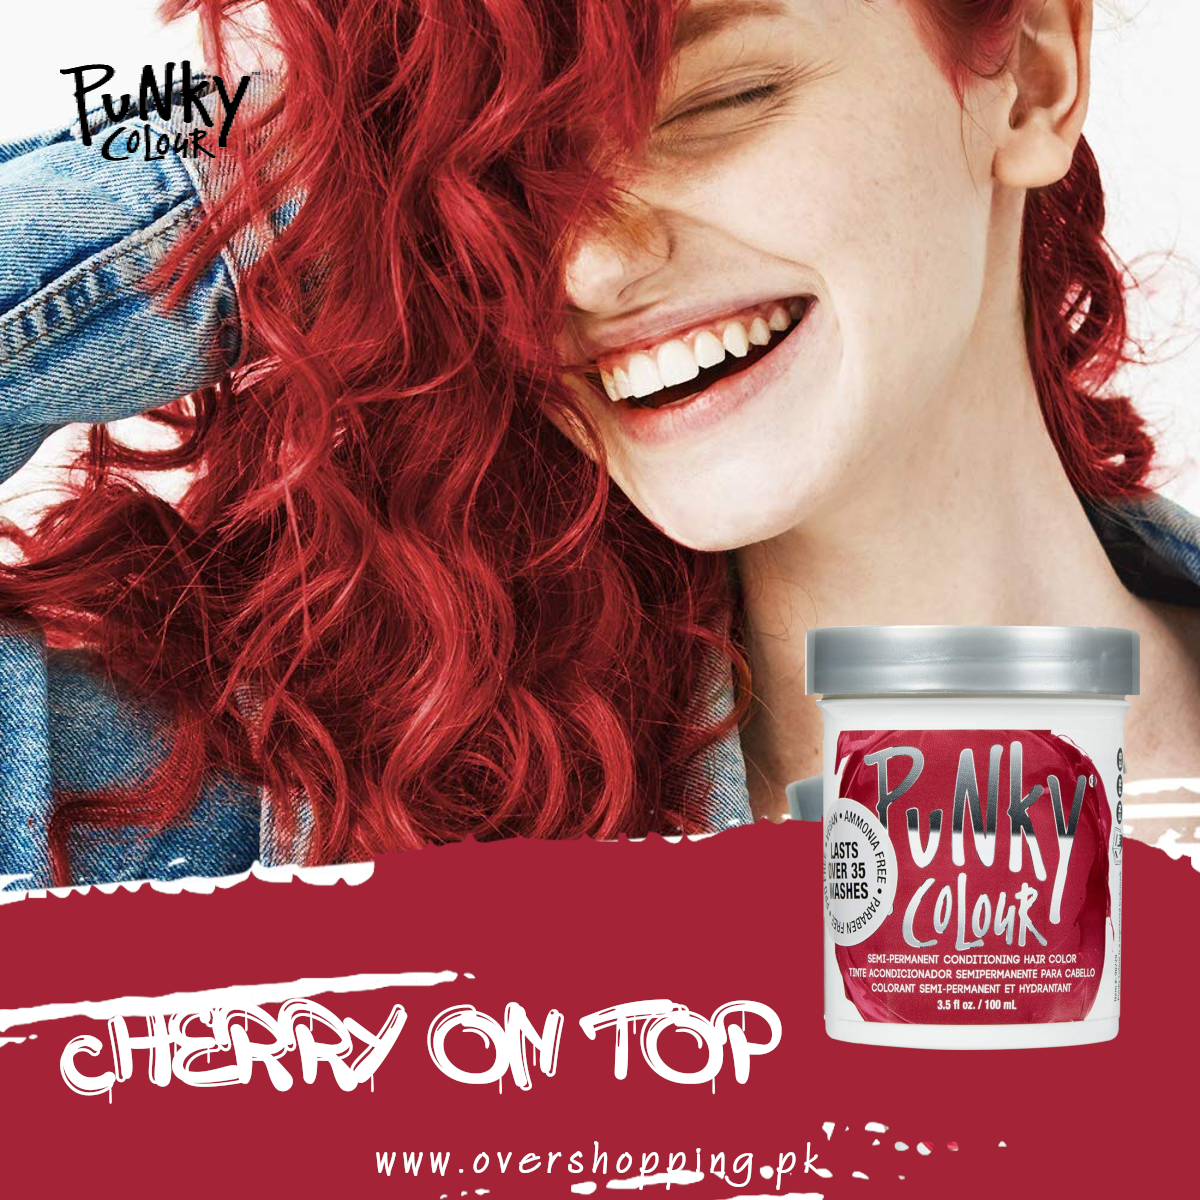 Punky Cherry on Top Semi Permanent Conditioning Hair Color lasts up to 35 washes, - 3.5 Fl.Oz (100ml)